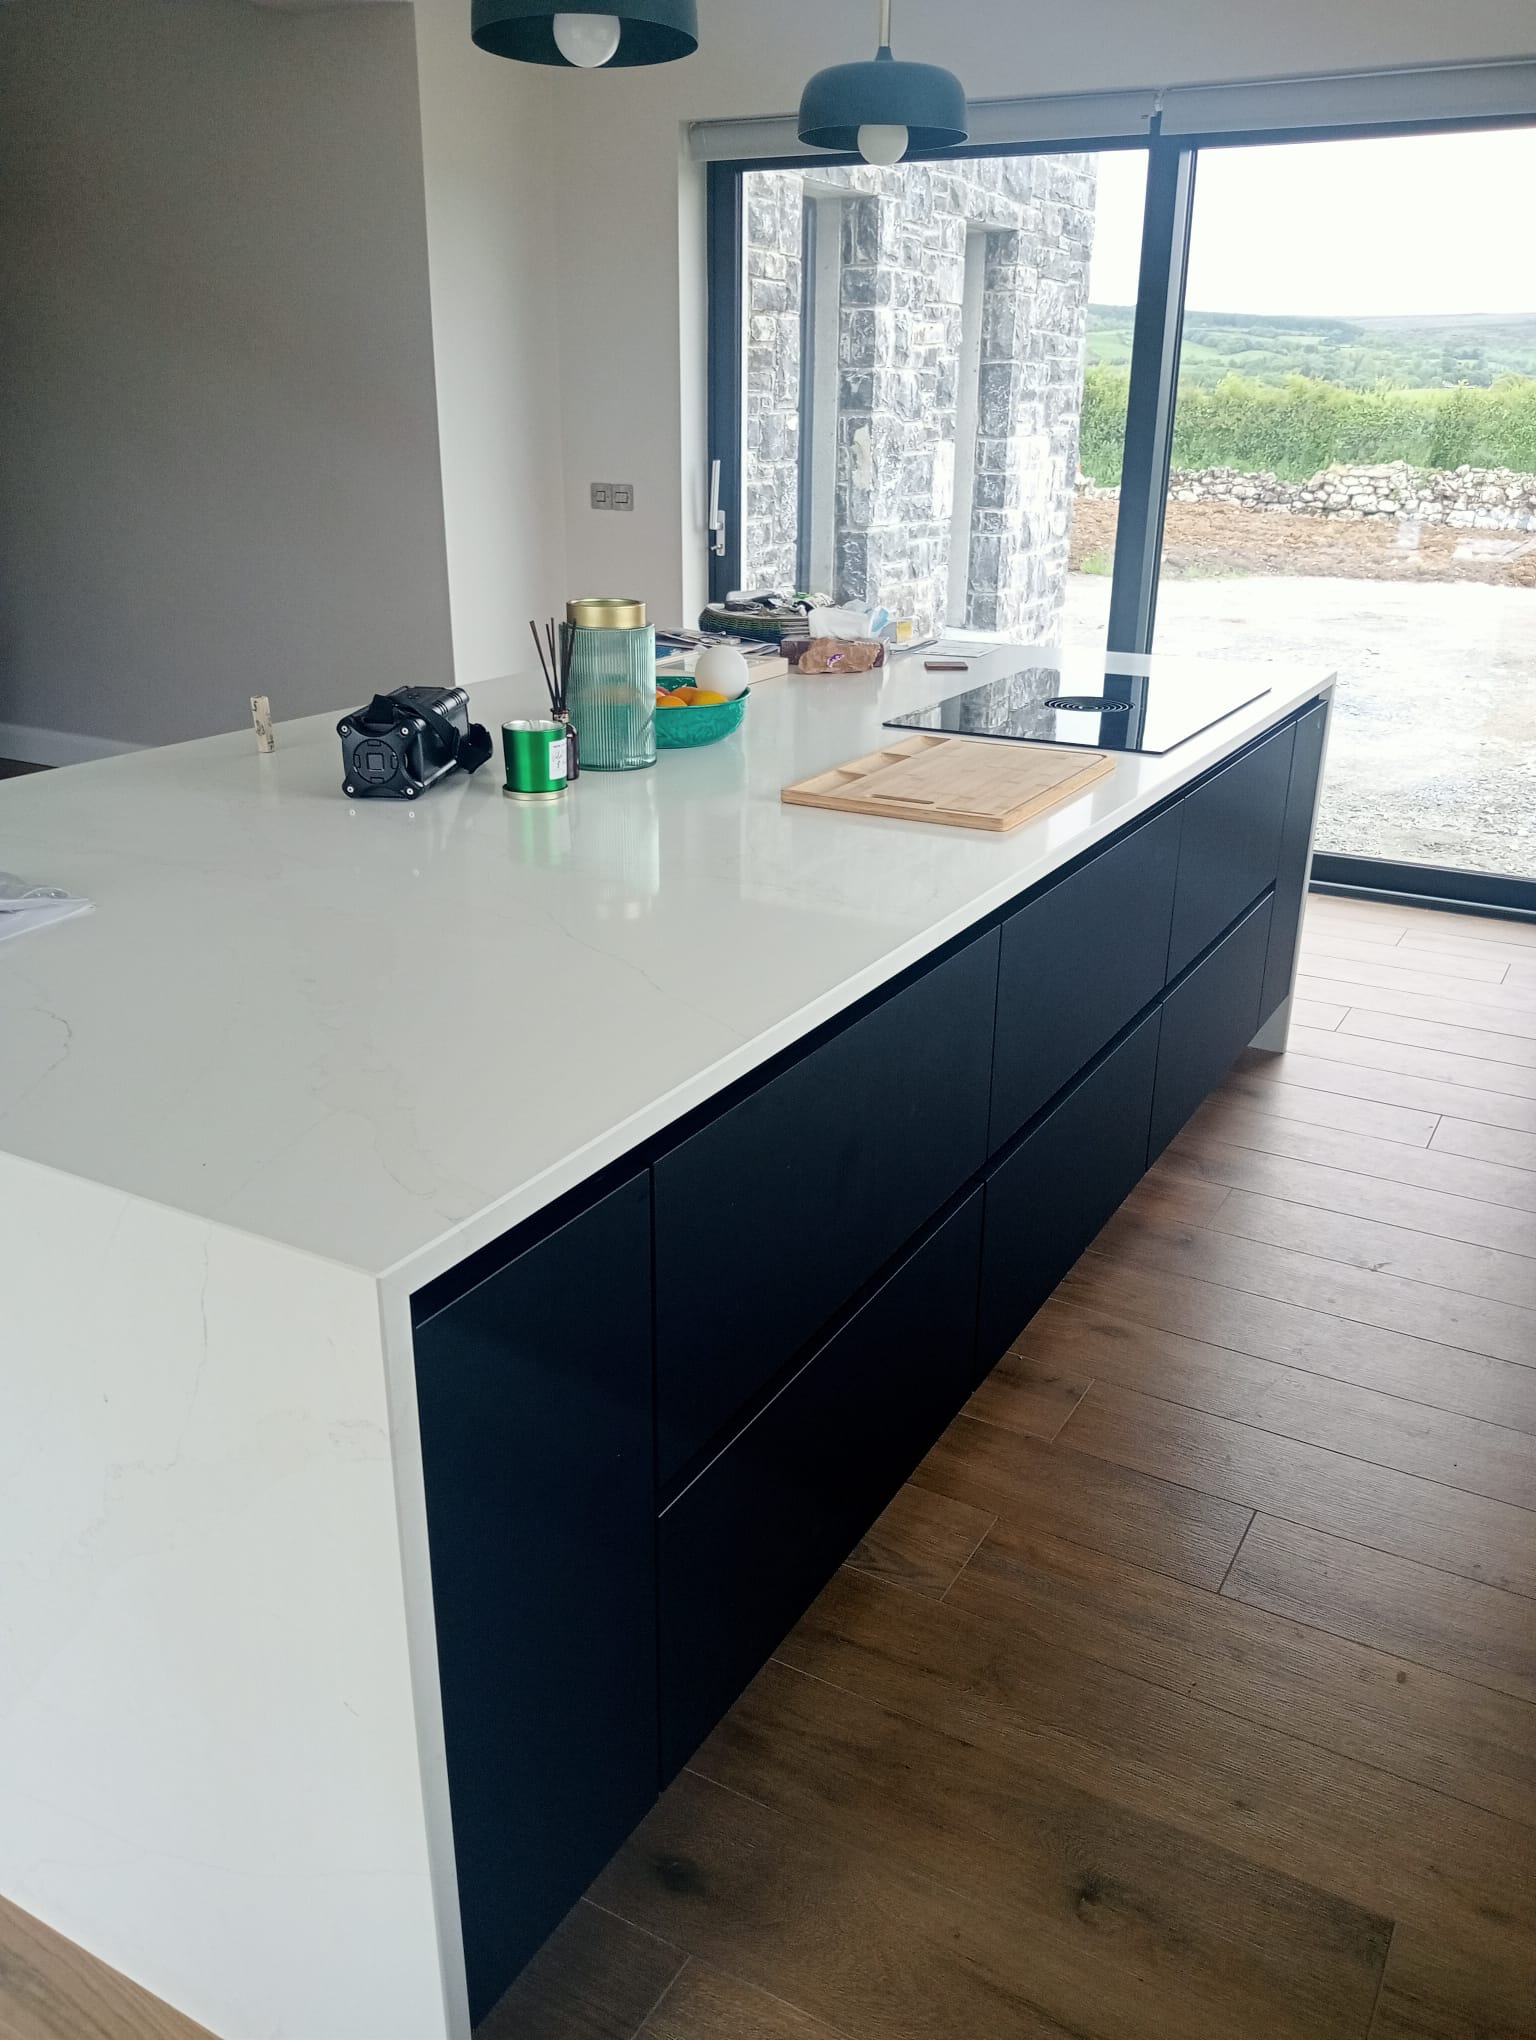 Donal Deely A2 Rated House Kitchen Unit